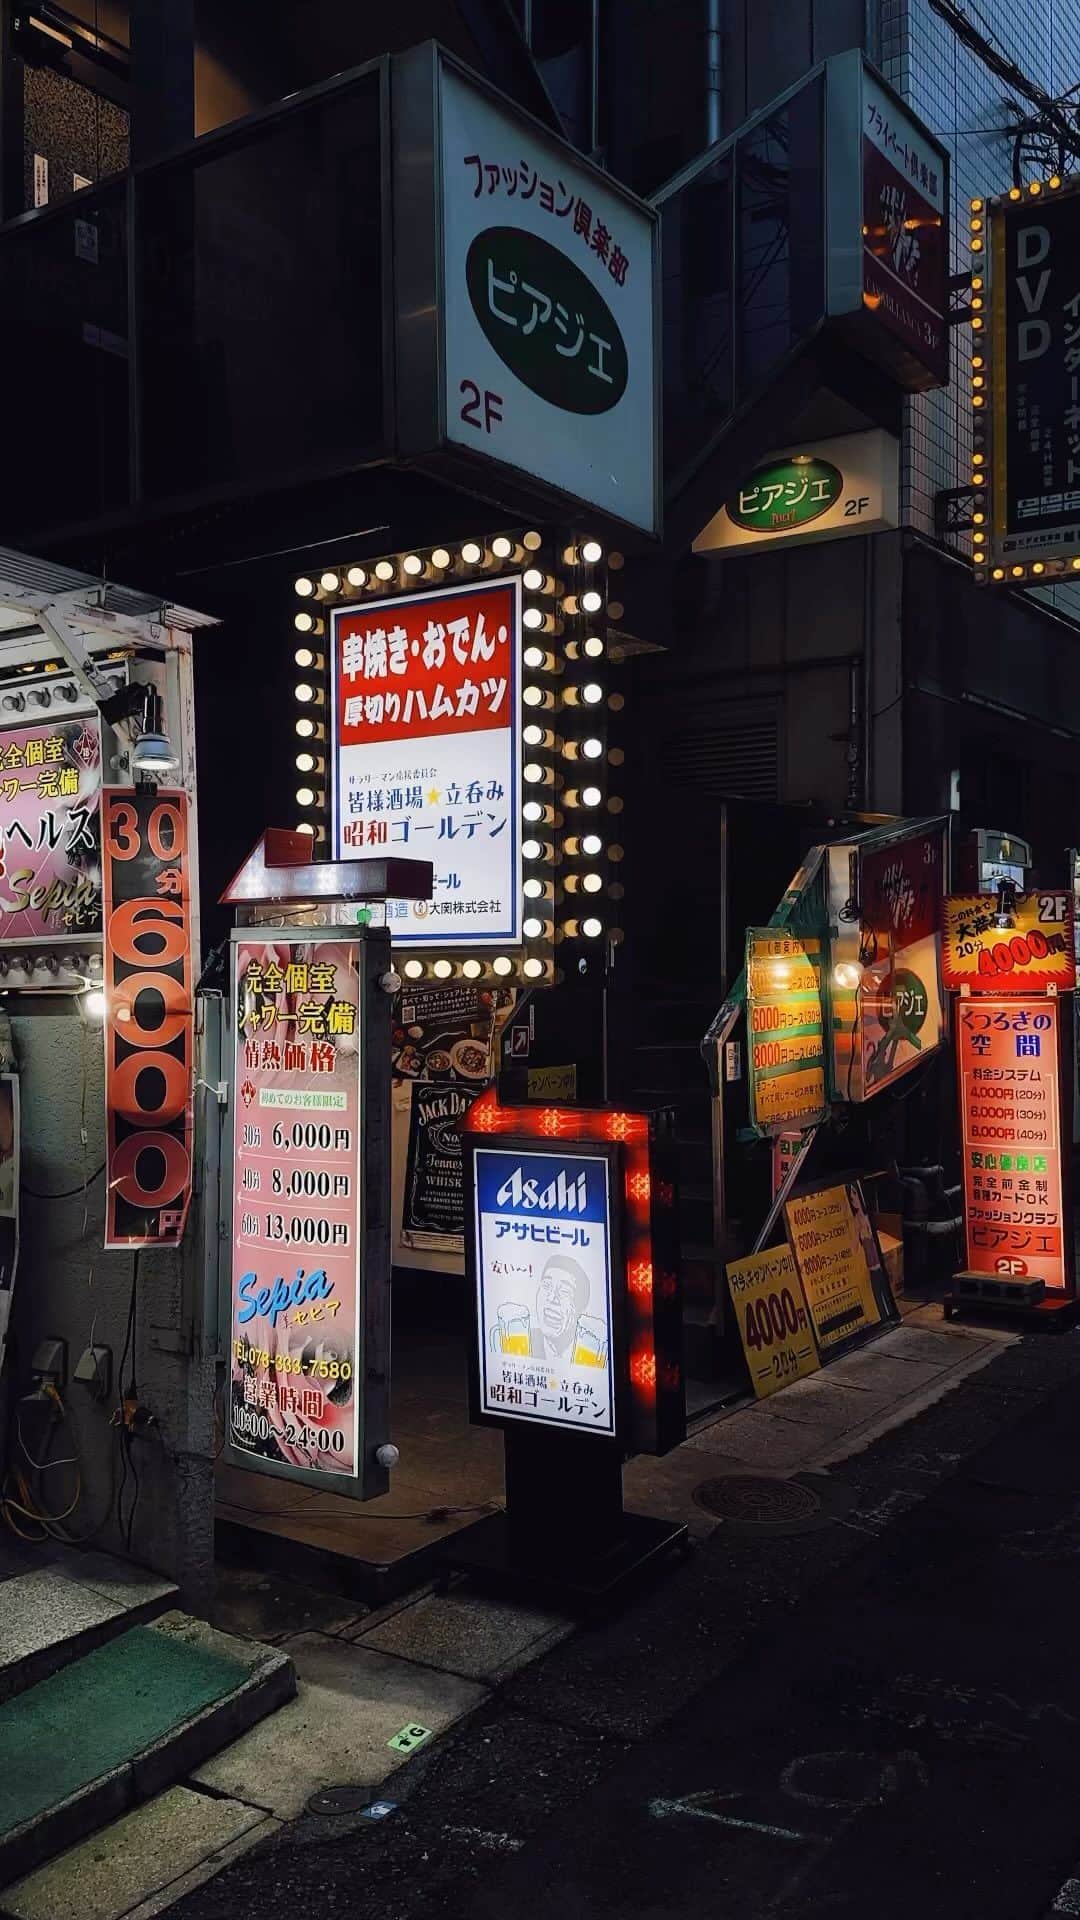 Kaiのインスタグラム：「Old school neon signs never gets old   Blinking lightbulbs and bold colors: a neon-lit glimpse into the late 80s in Japan. Many of these neon signs have been replaced by more modern ones. But there are still a few that remain, a reminder of a time gone by. When you see these signs, you can’t help but feel a sense of nostalgia.   #kobe #japan #neonsign #beautifuldestinations」